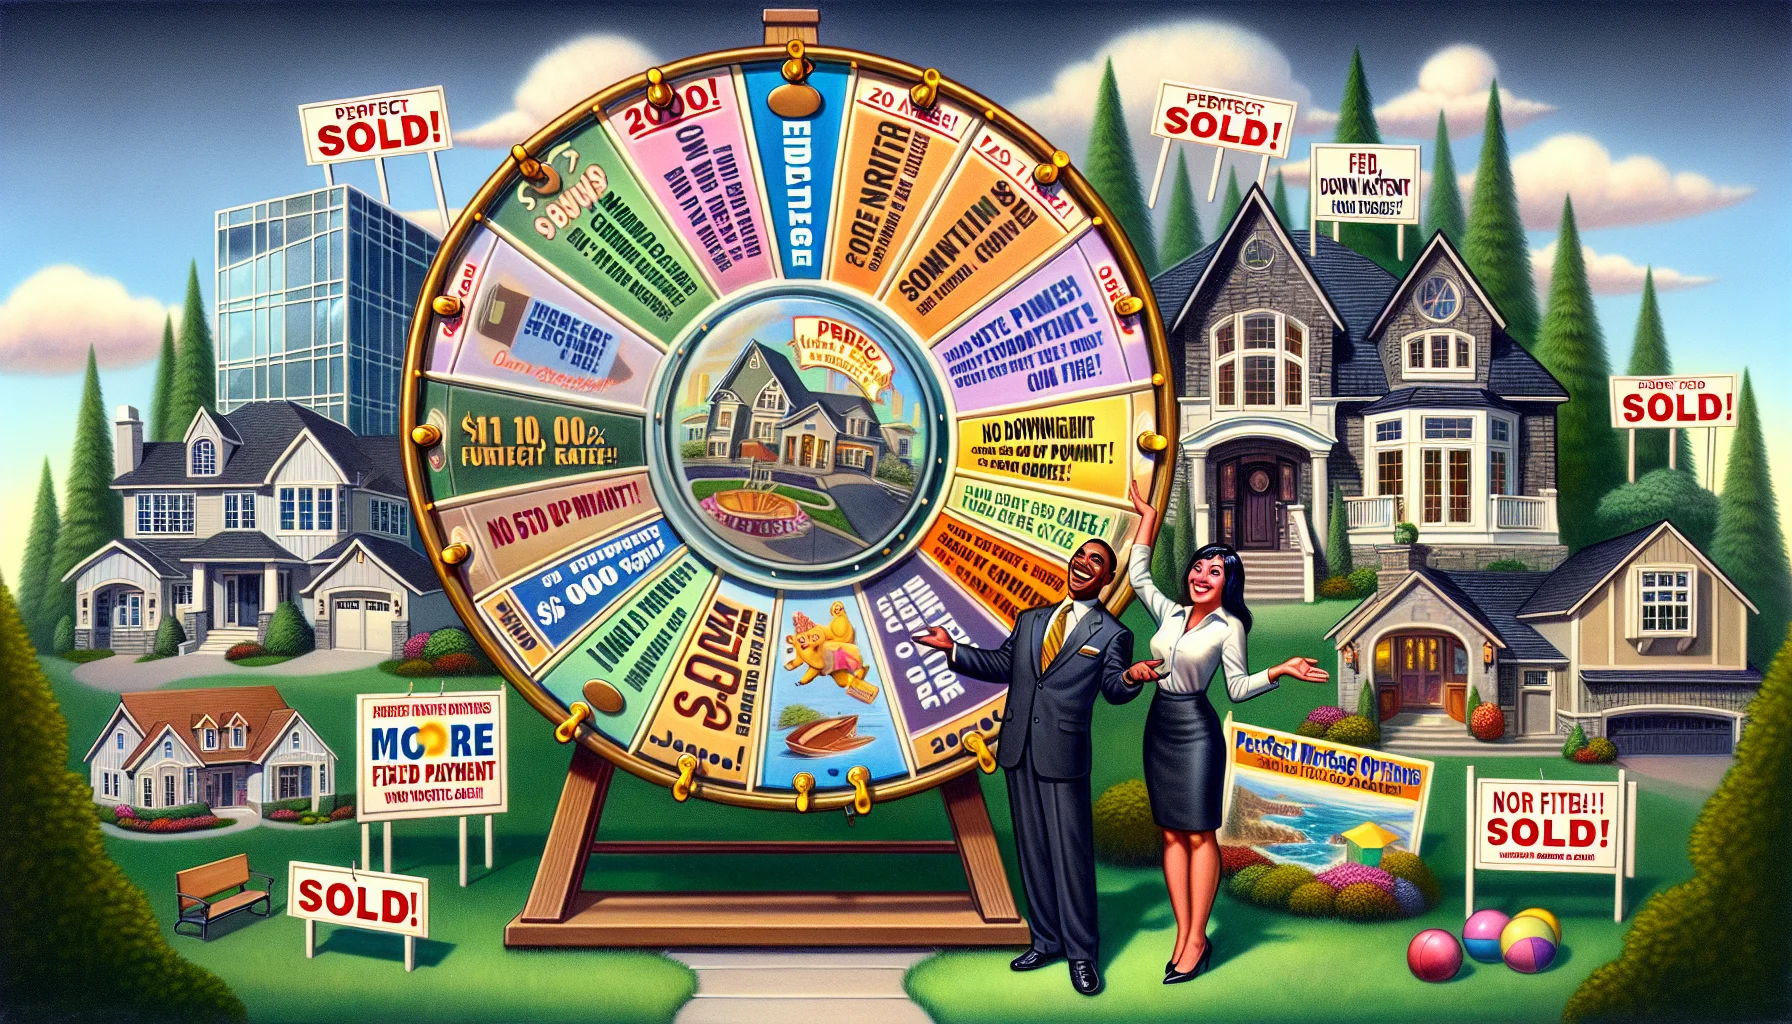 An amusing, realistic portrayal of the ideal scenario for mortgage options in real estate. Picture a brochure-like spread featuring a variety of lavish homes of different architectural styles – a modern glass mansion, a grand European castle, and a cozy country cottage – all having 'Sold!' placards in their well-manicured lawns. Nearby, a large, colorful wheel of fortune labeled 'Perfect Mortgage Options' spins, each of its segments depicting different beneficial features like '0% Interest!', 'No Down Payment!', and 'Lifetime Fixed Rate!'. A pair of delighted, diverse individuals - a Black woman and a Hispanic man, both wearing professional real estate agent blazers - cheerfully guide viewers through the dream-like scene.